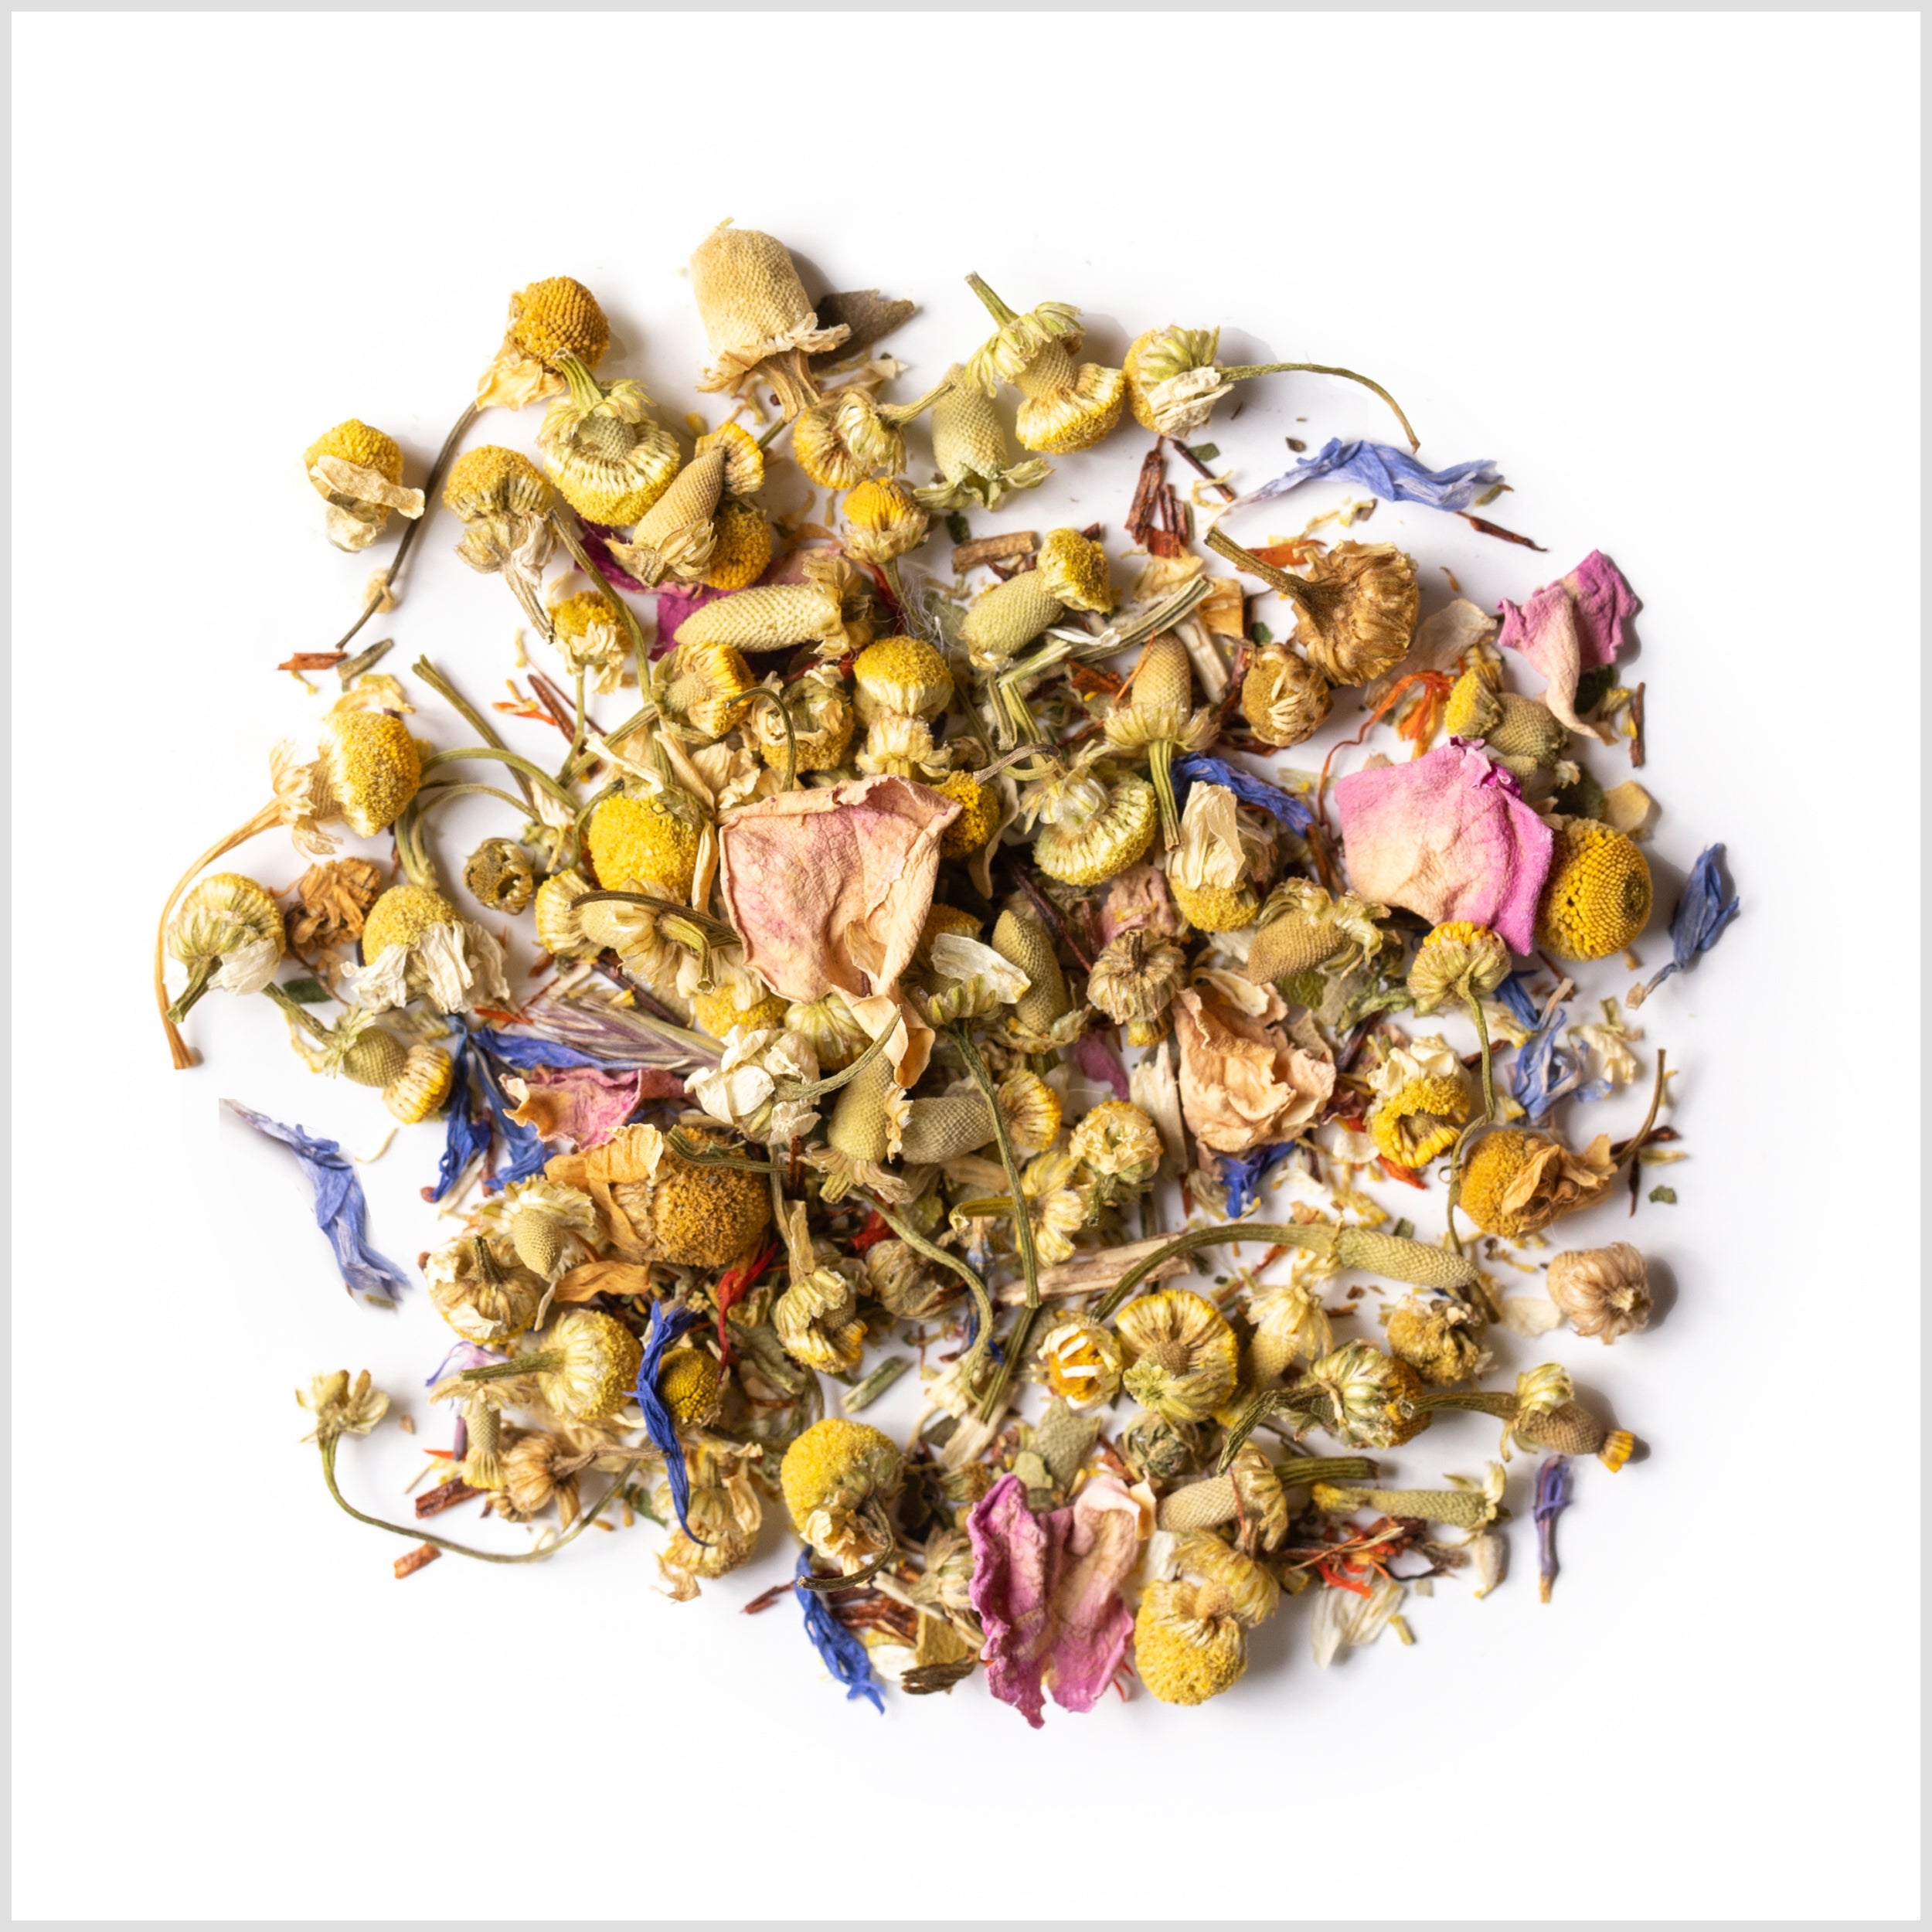 Circular pile of loose-leaf Meadow herbal infusion featuring yellow chamomile buds, pink rose petals and blue cyani flowers.